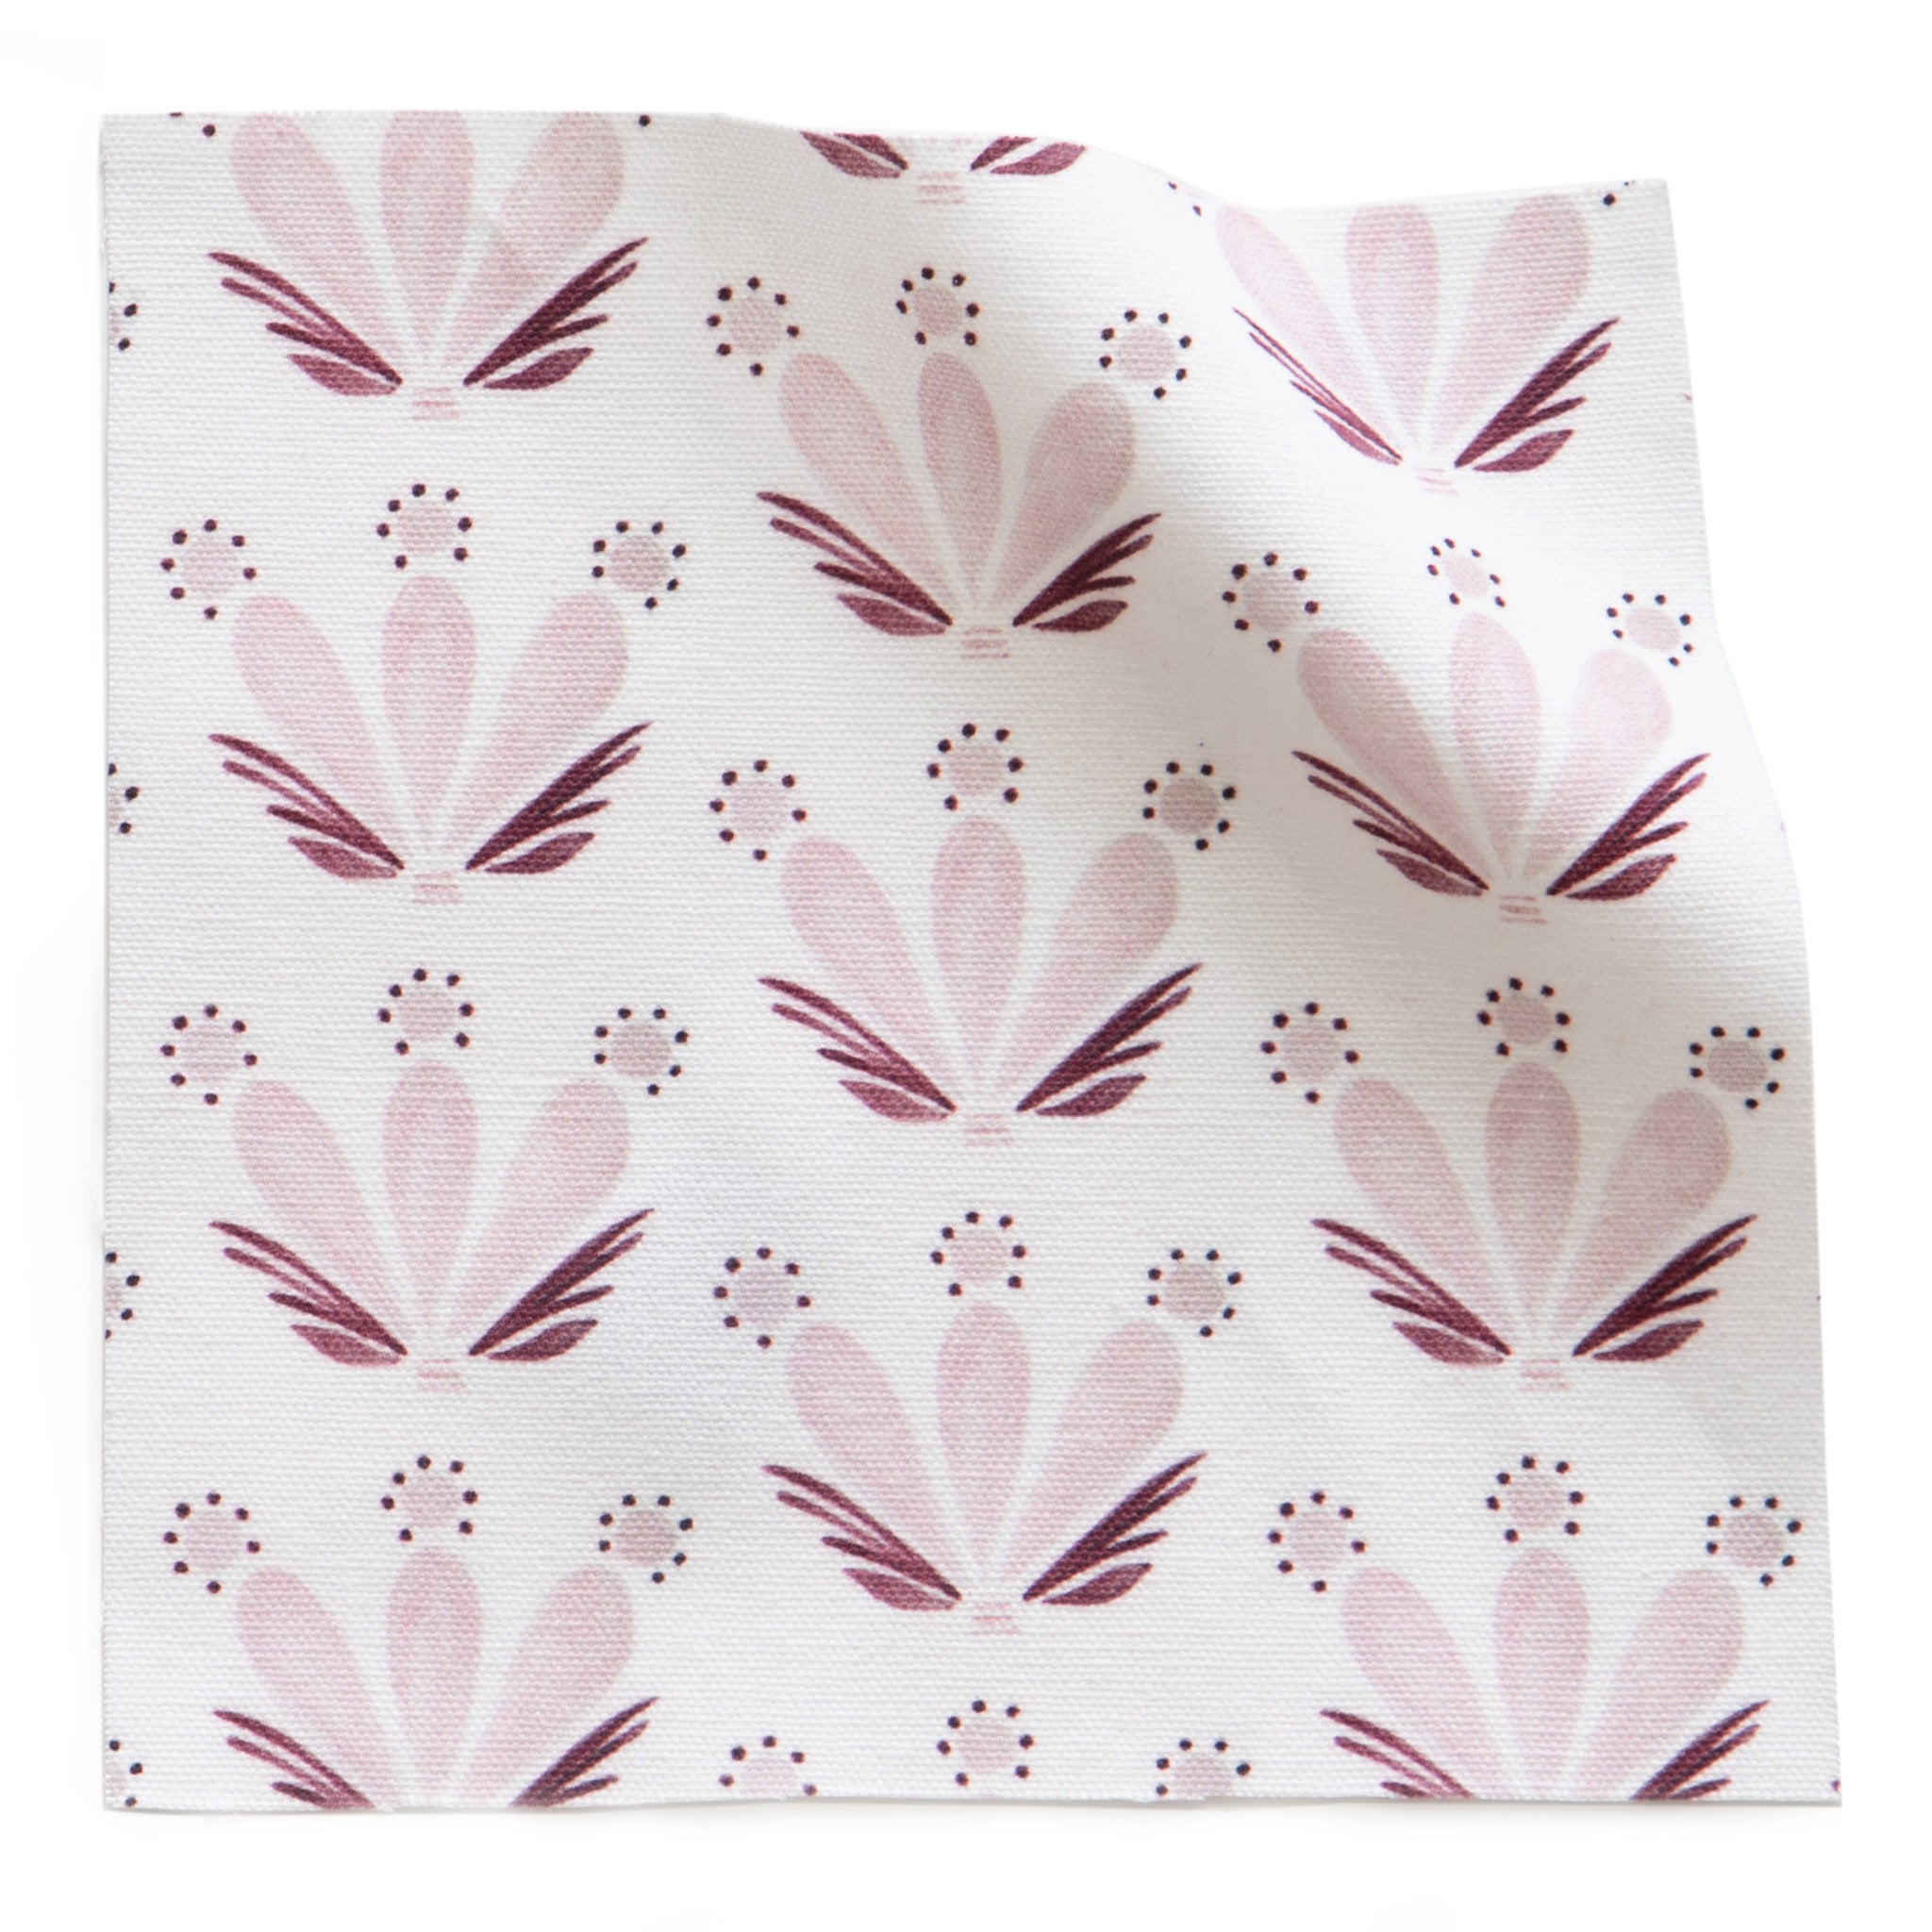 Pink & Burgundy Drop Repeat Floral Printed Cotton Swatch